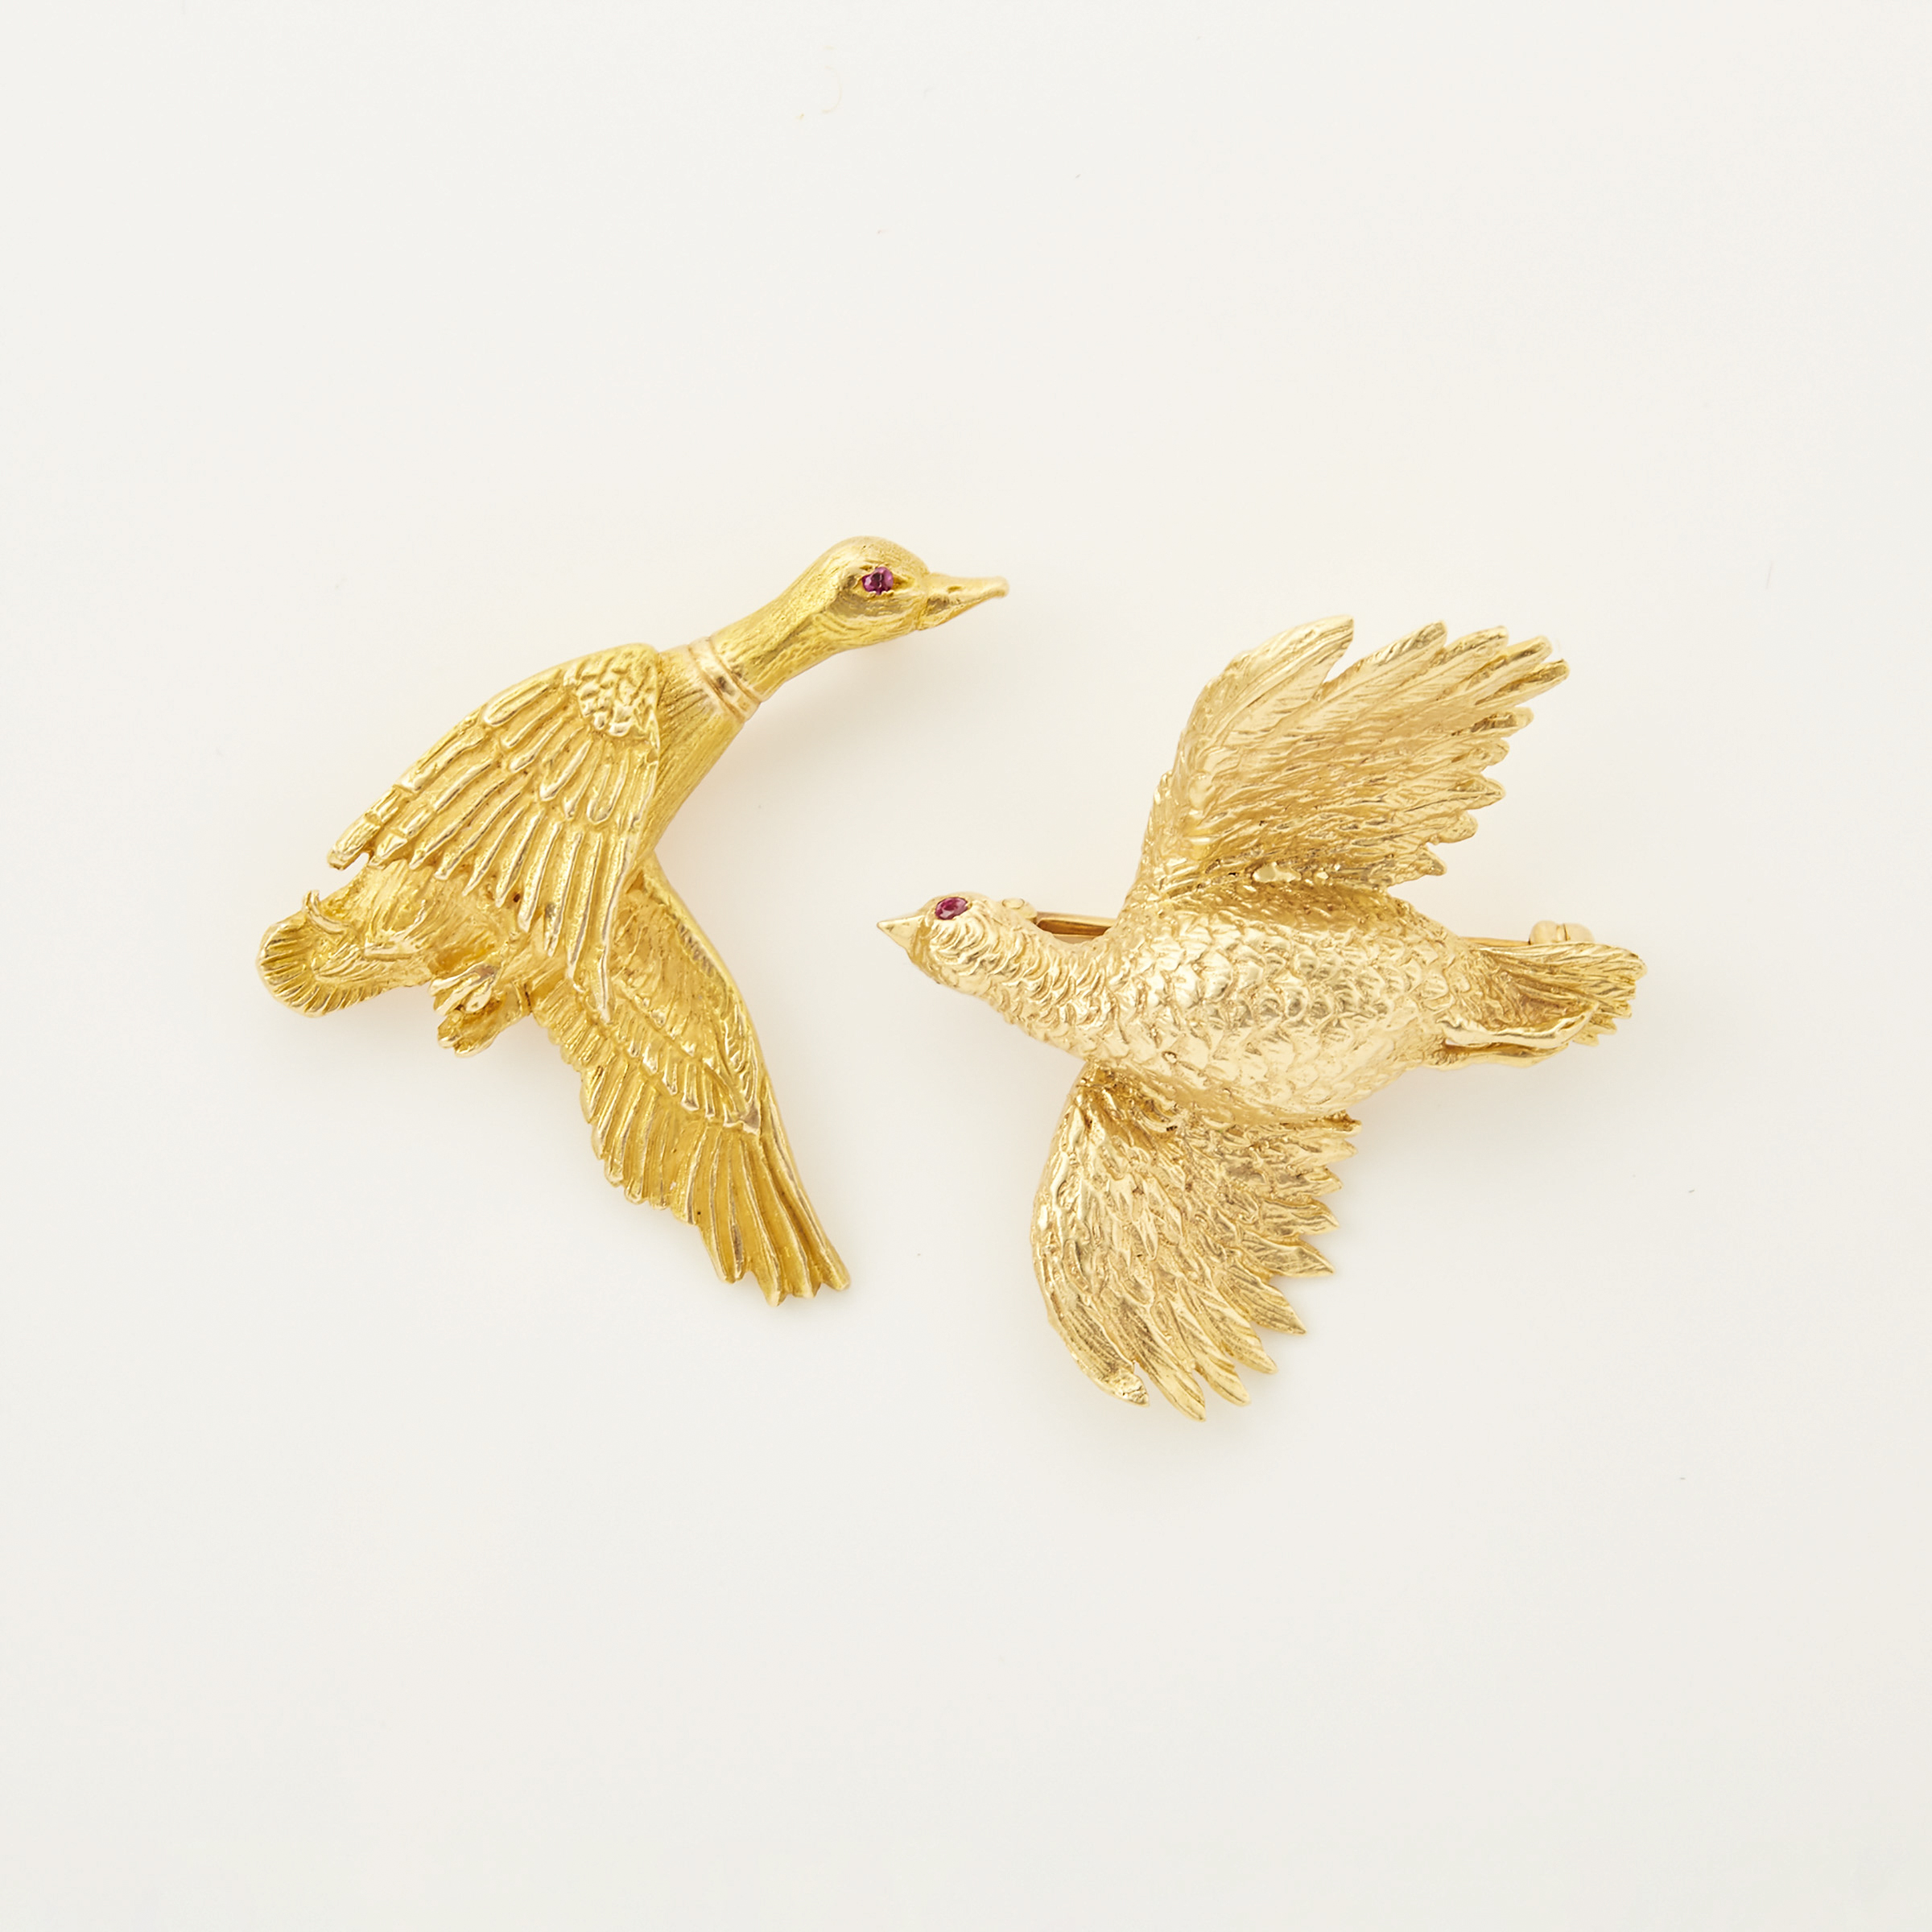 2 x 14k Yellow Gold Brooches